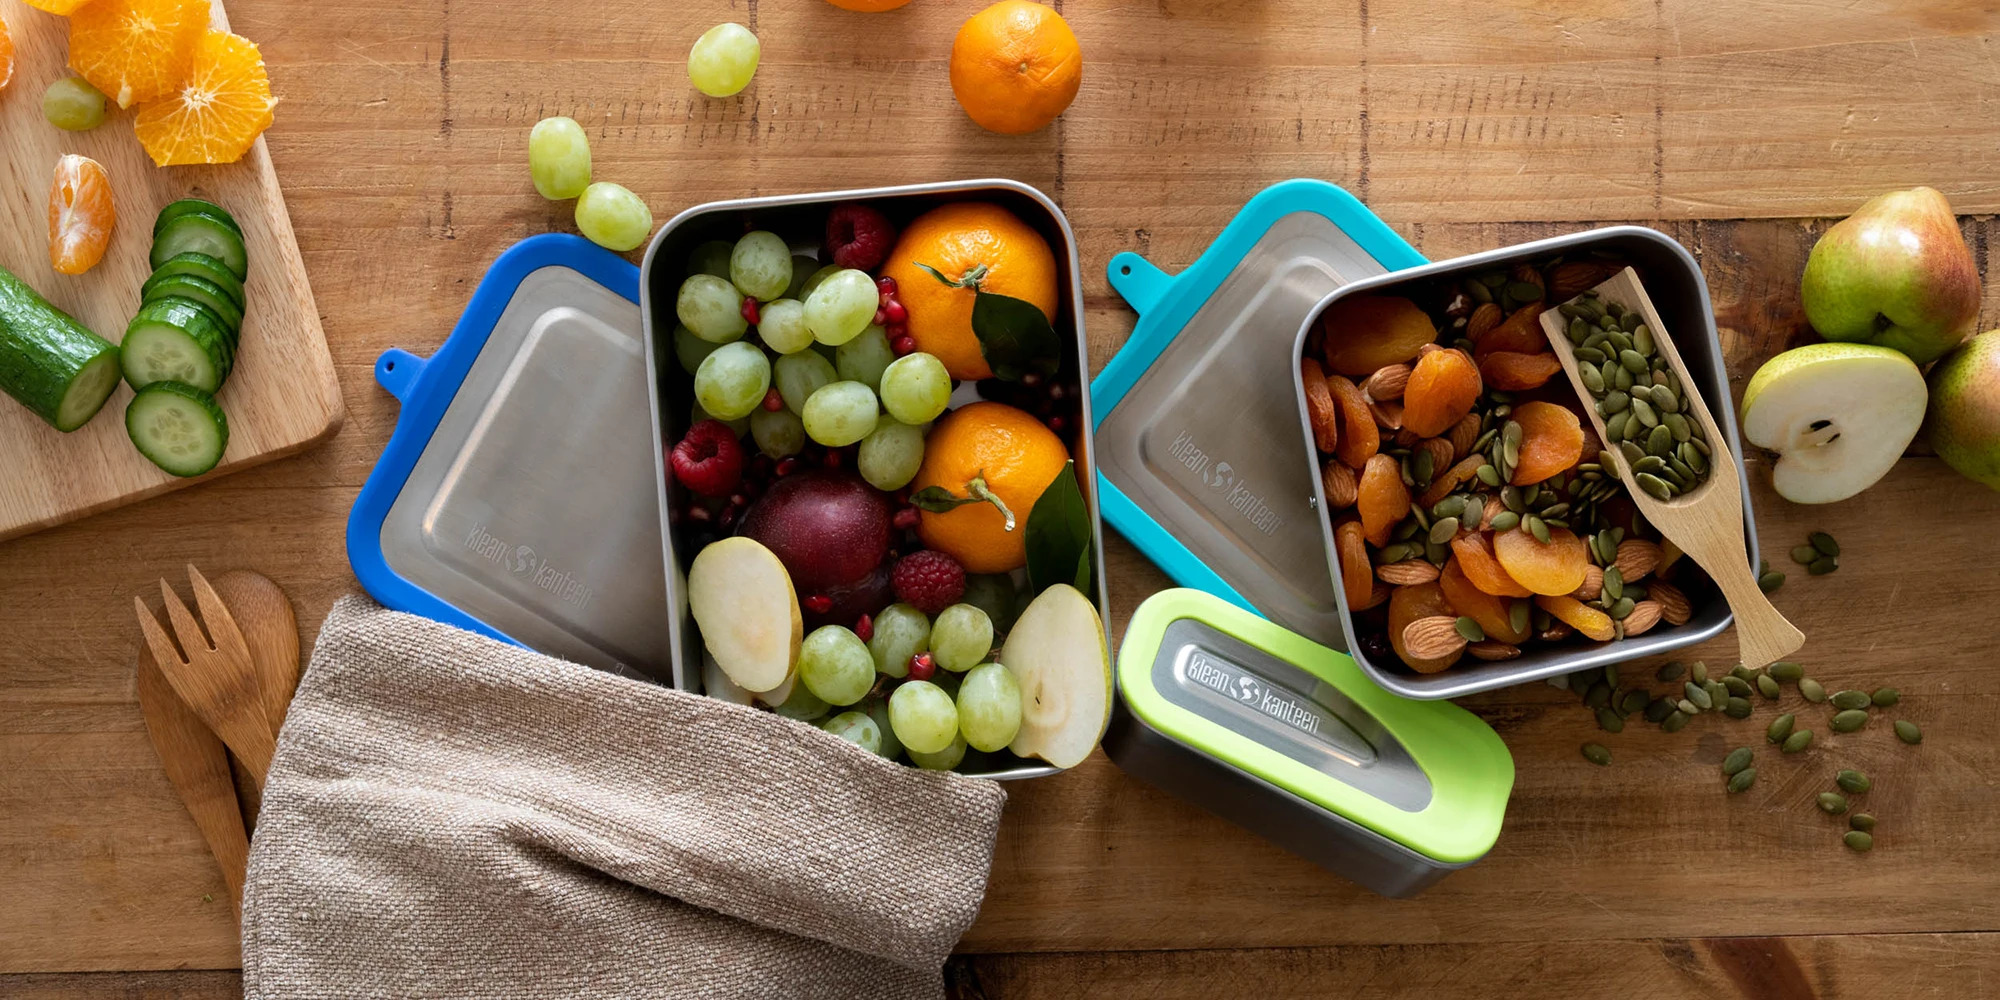 Klean Kanteen Introduce New Plastic Free Food Boxes